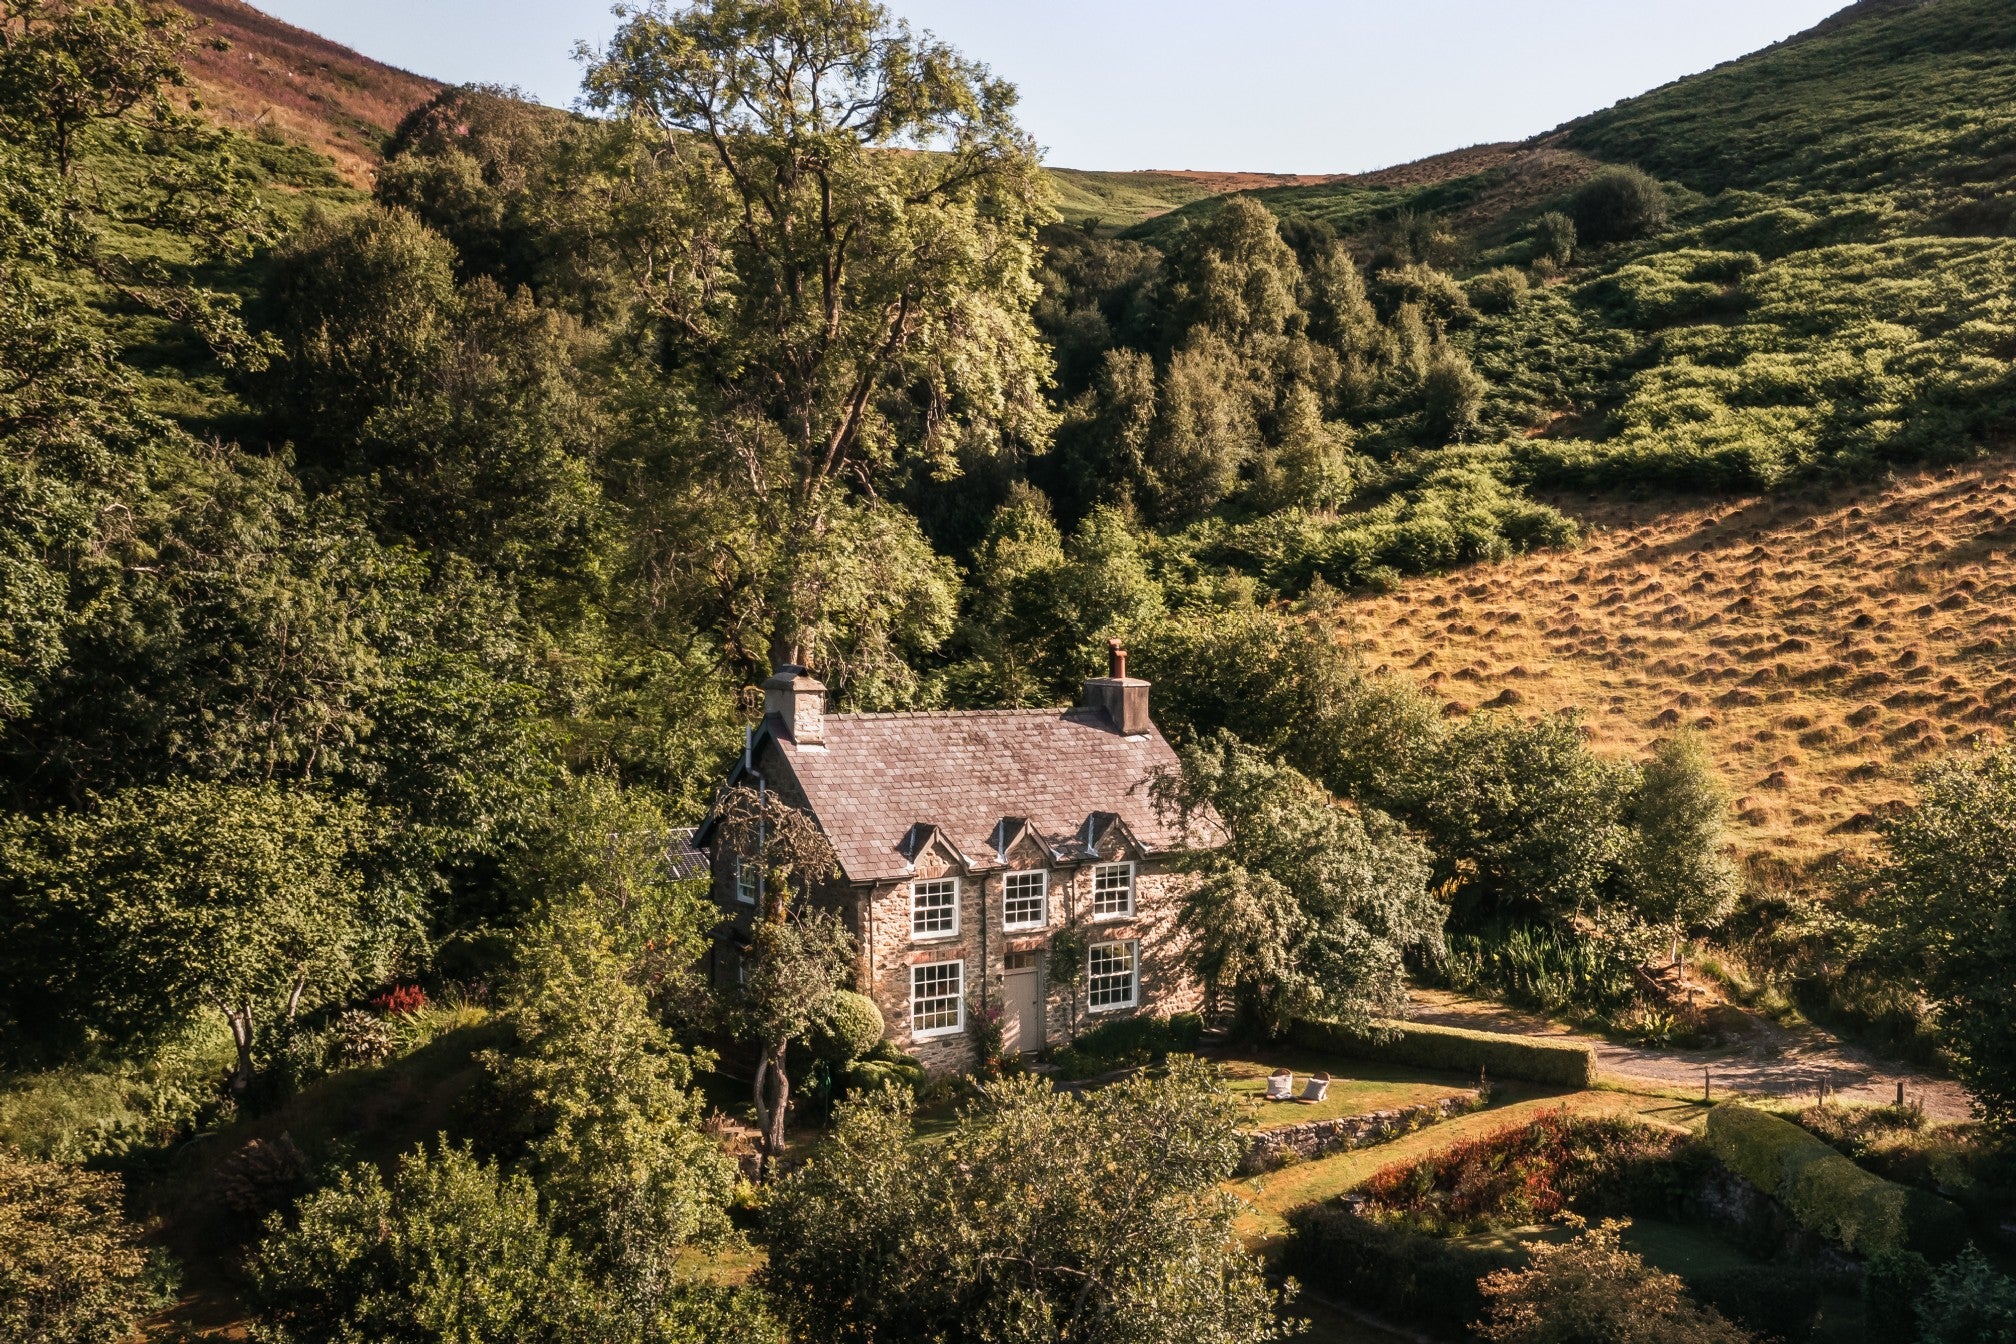 British Countryside Design: A Study of the Perfectly Imperfect